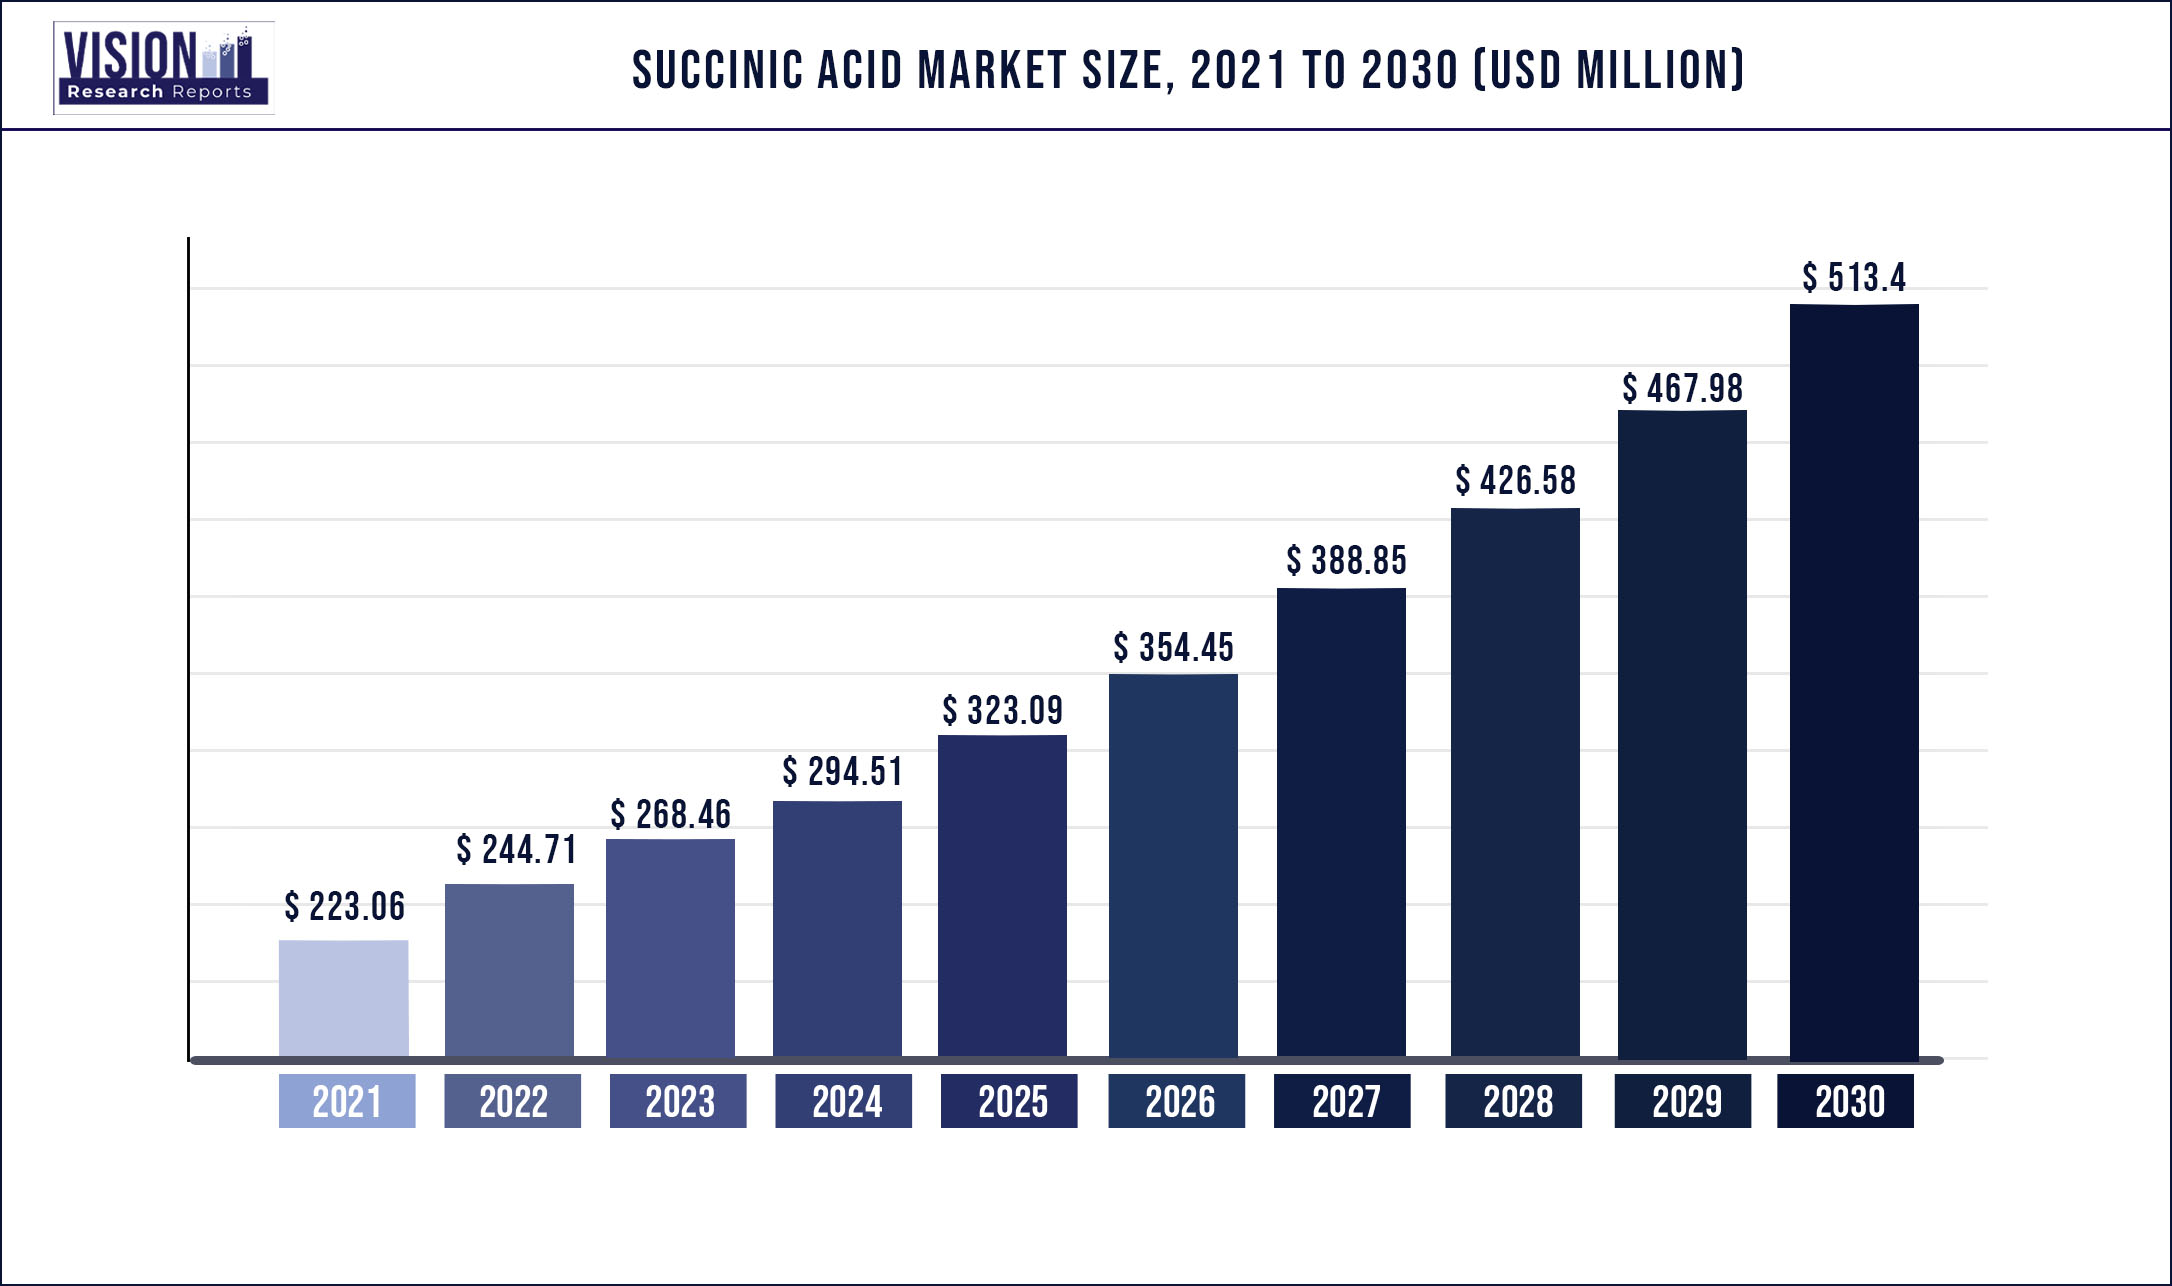 Succinic Acid Market Size 2021 to 2030